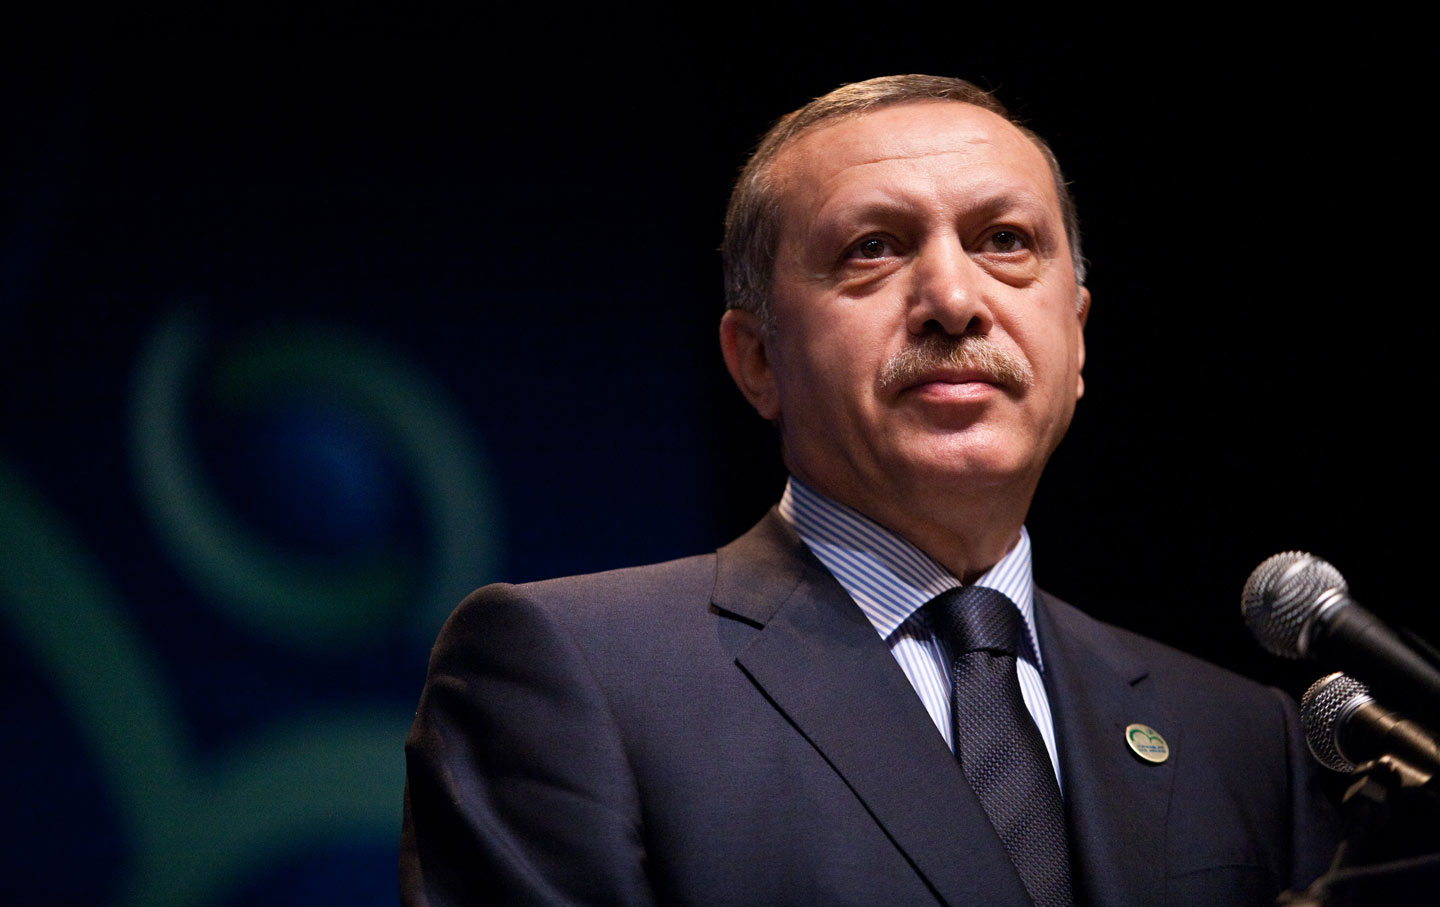 How Should the US and NATO Respond to Erdogan’s Electoral Triumph?